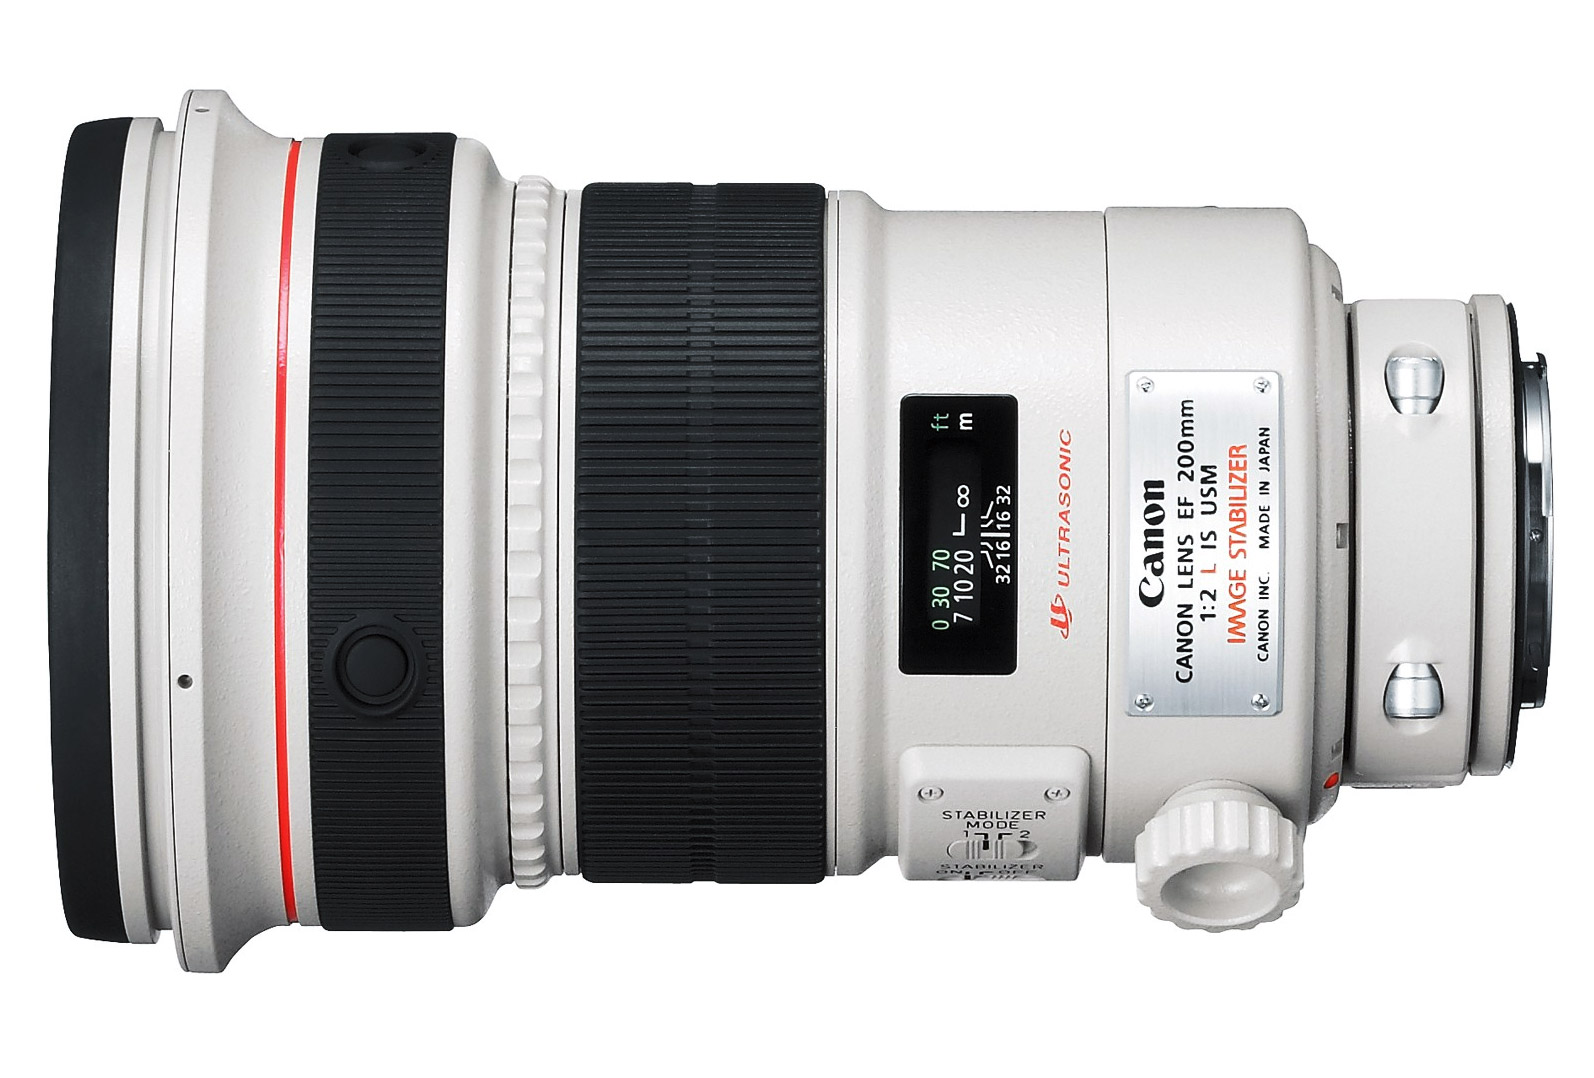 Canon EF 200mm f/2 L IS USM